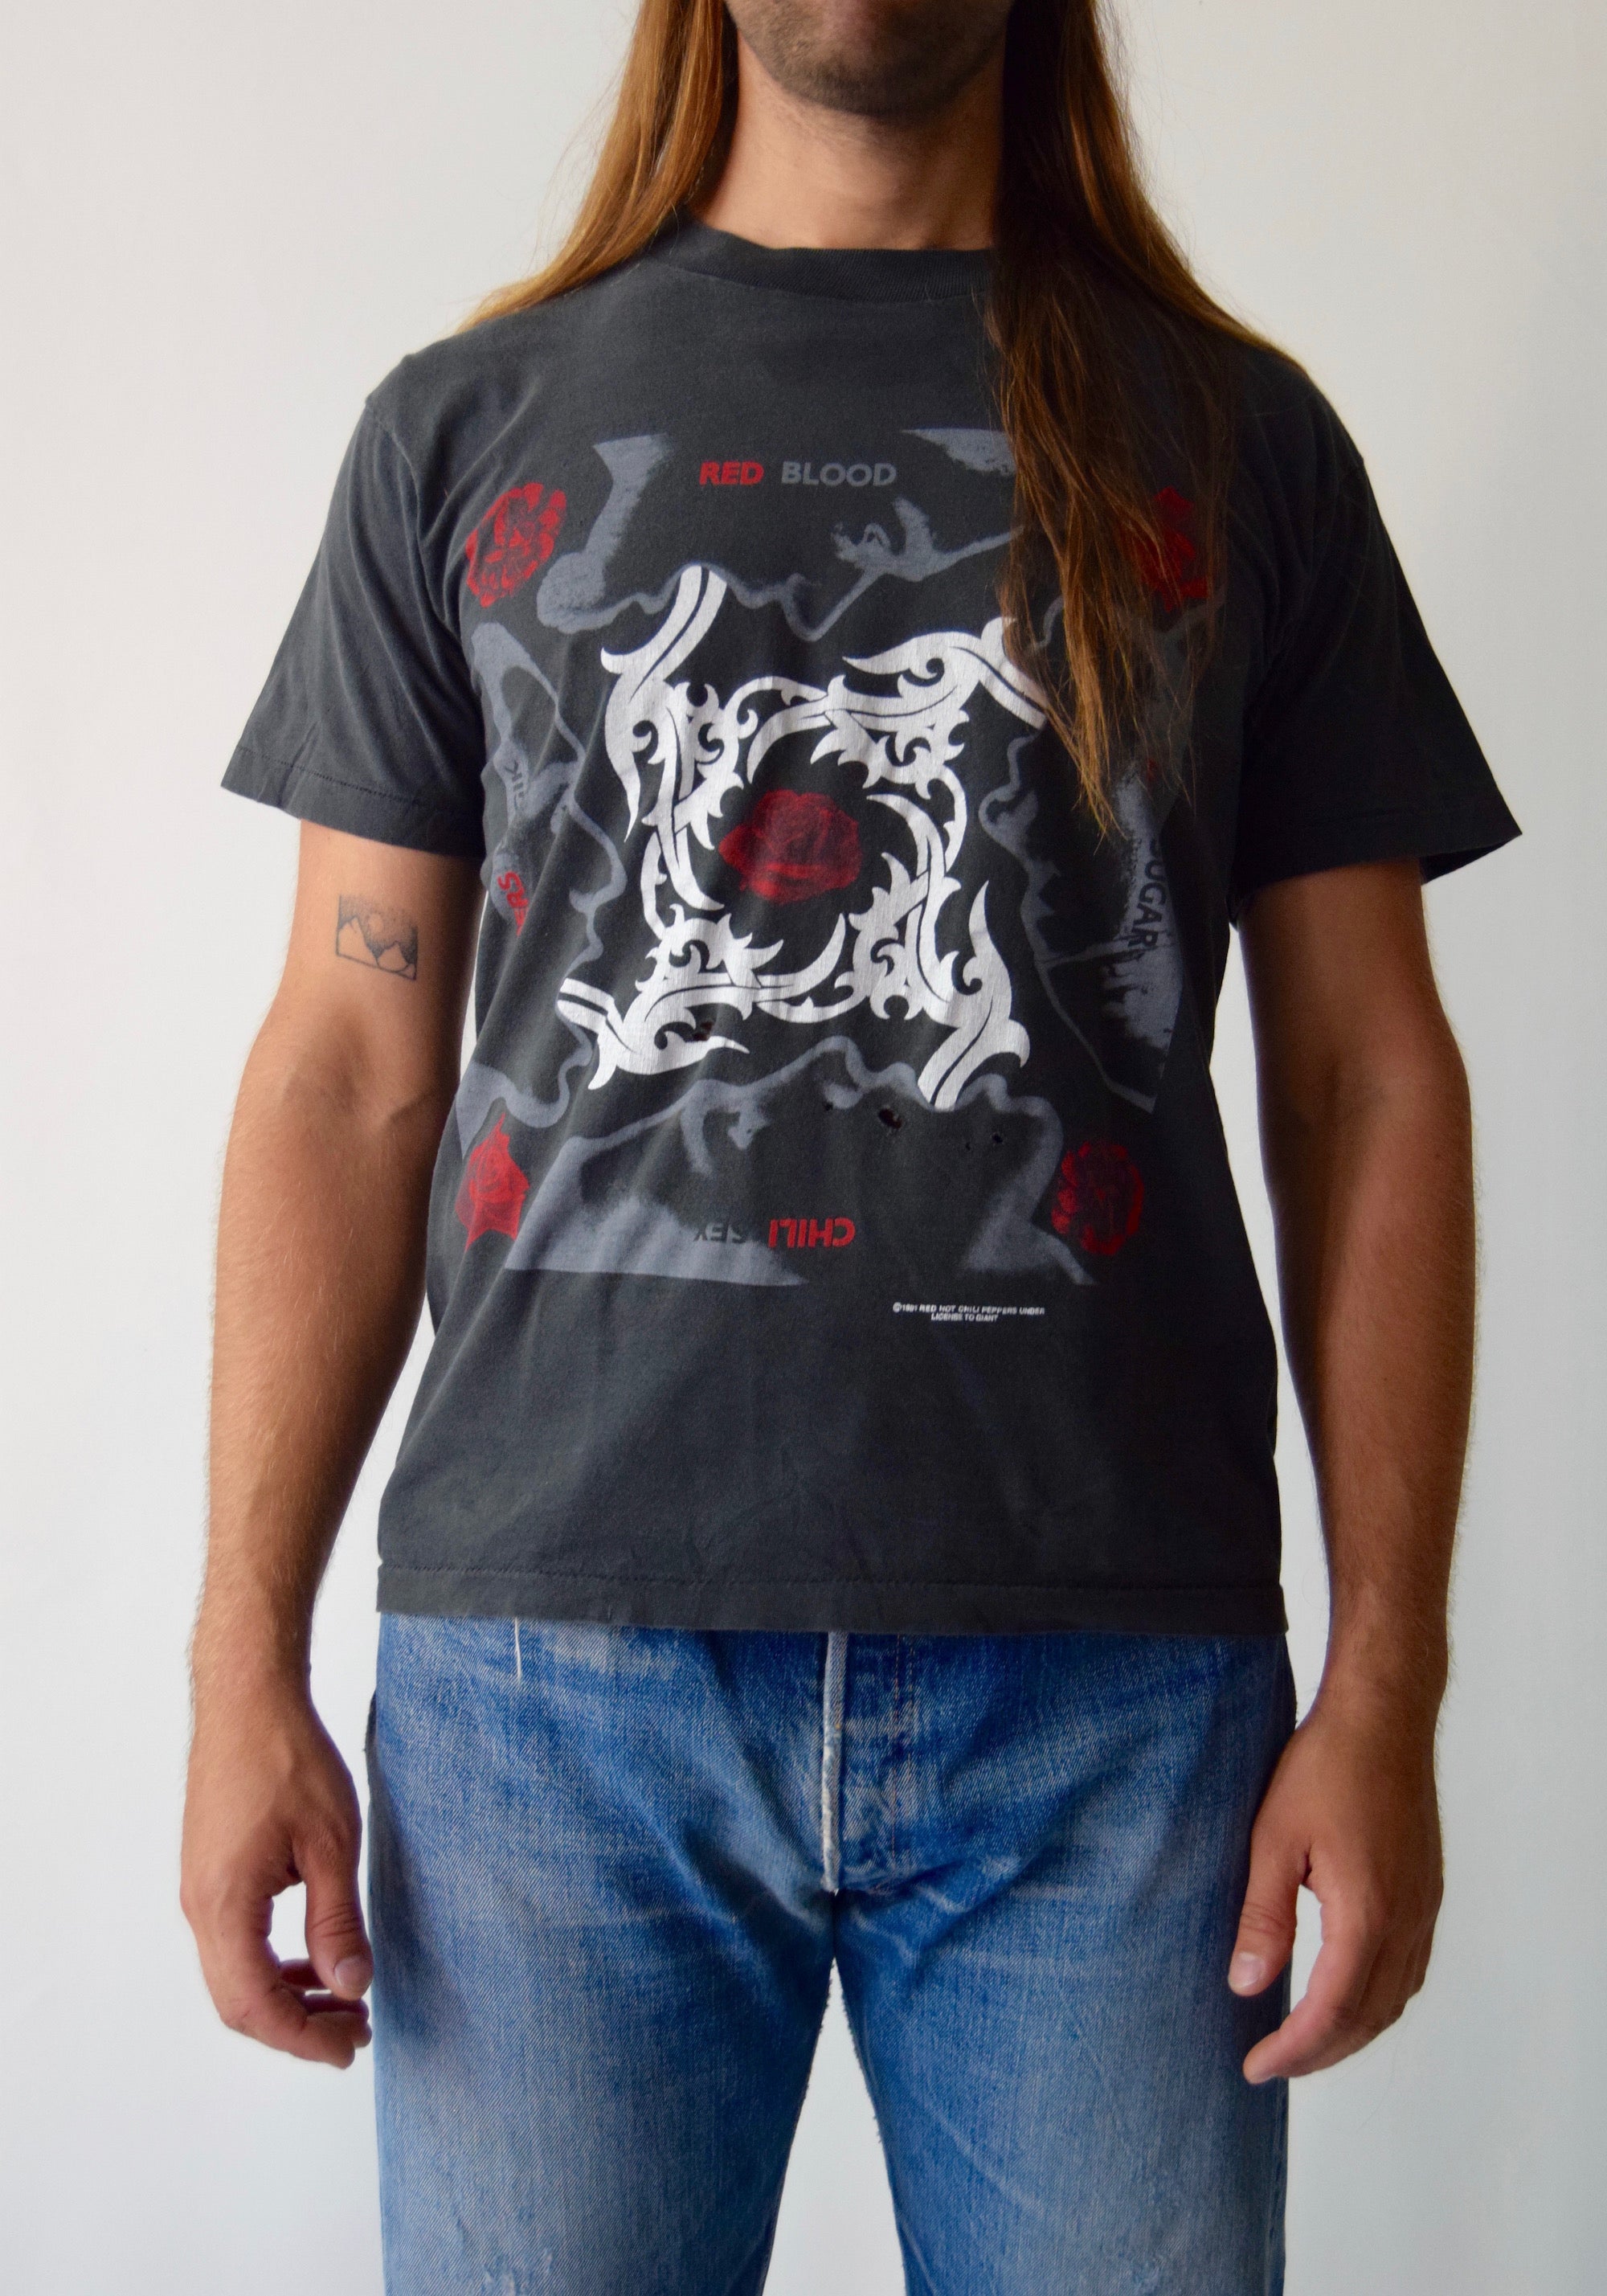 91' Blood Sugar Sex Magik Red Hot Chili Peppers T-Shirt